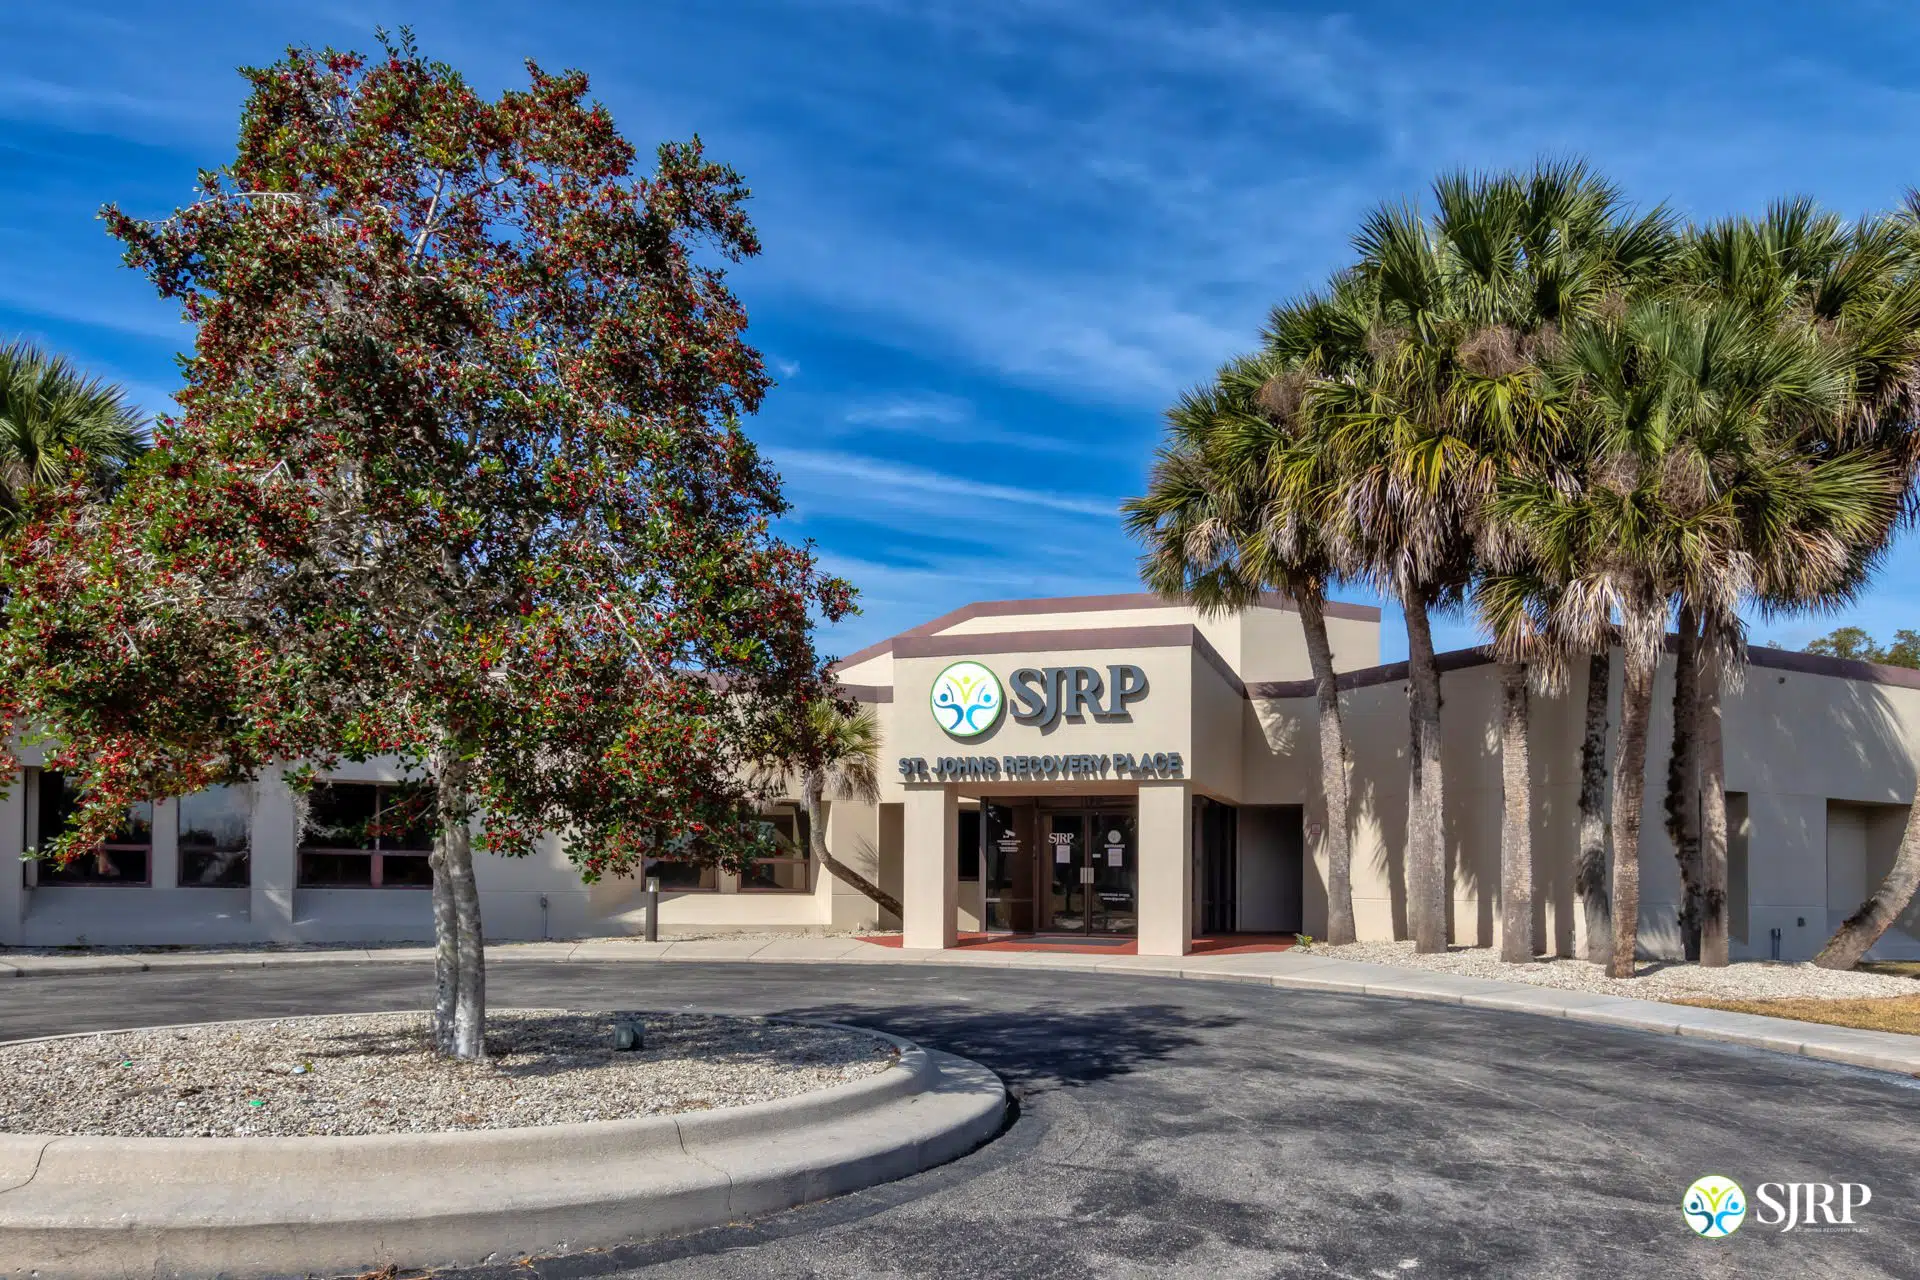 Exterior front entrance of SJRP with palm trees and blue sky.